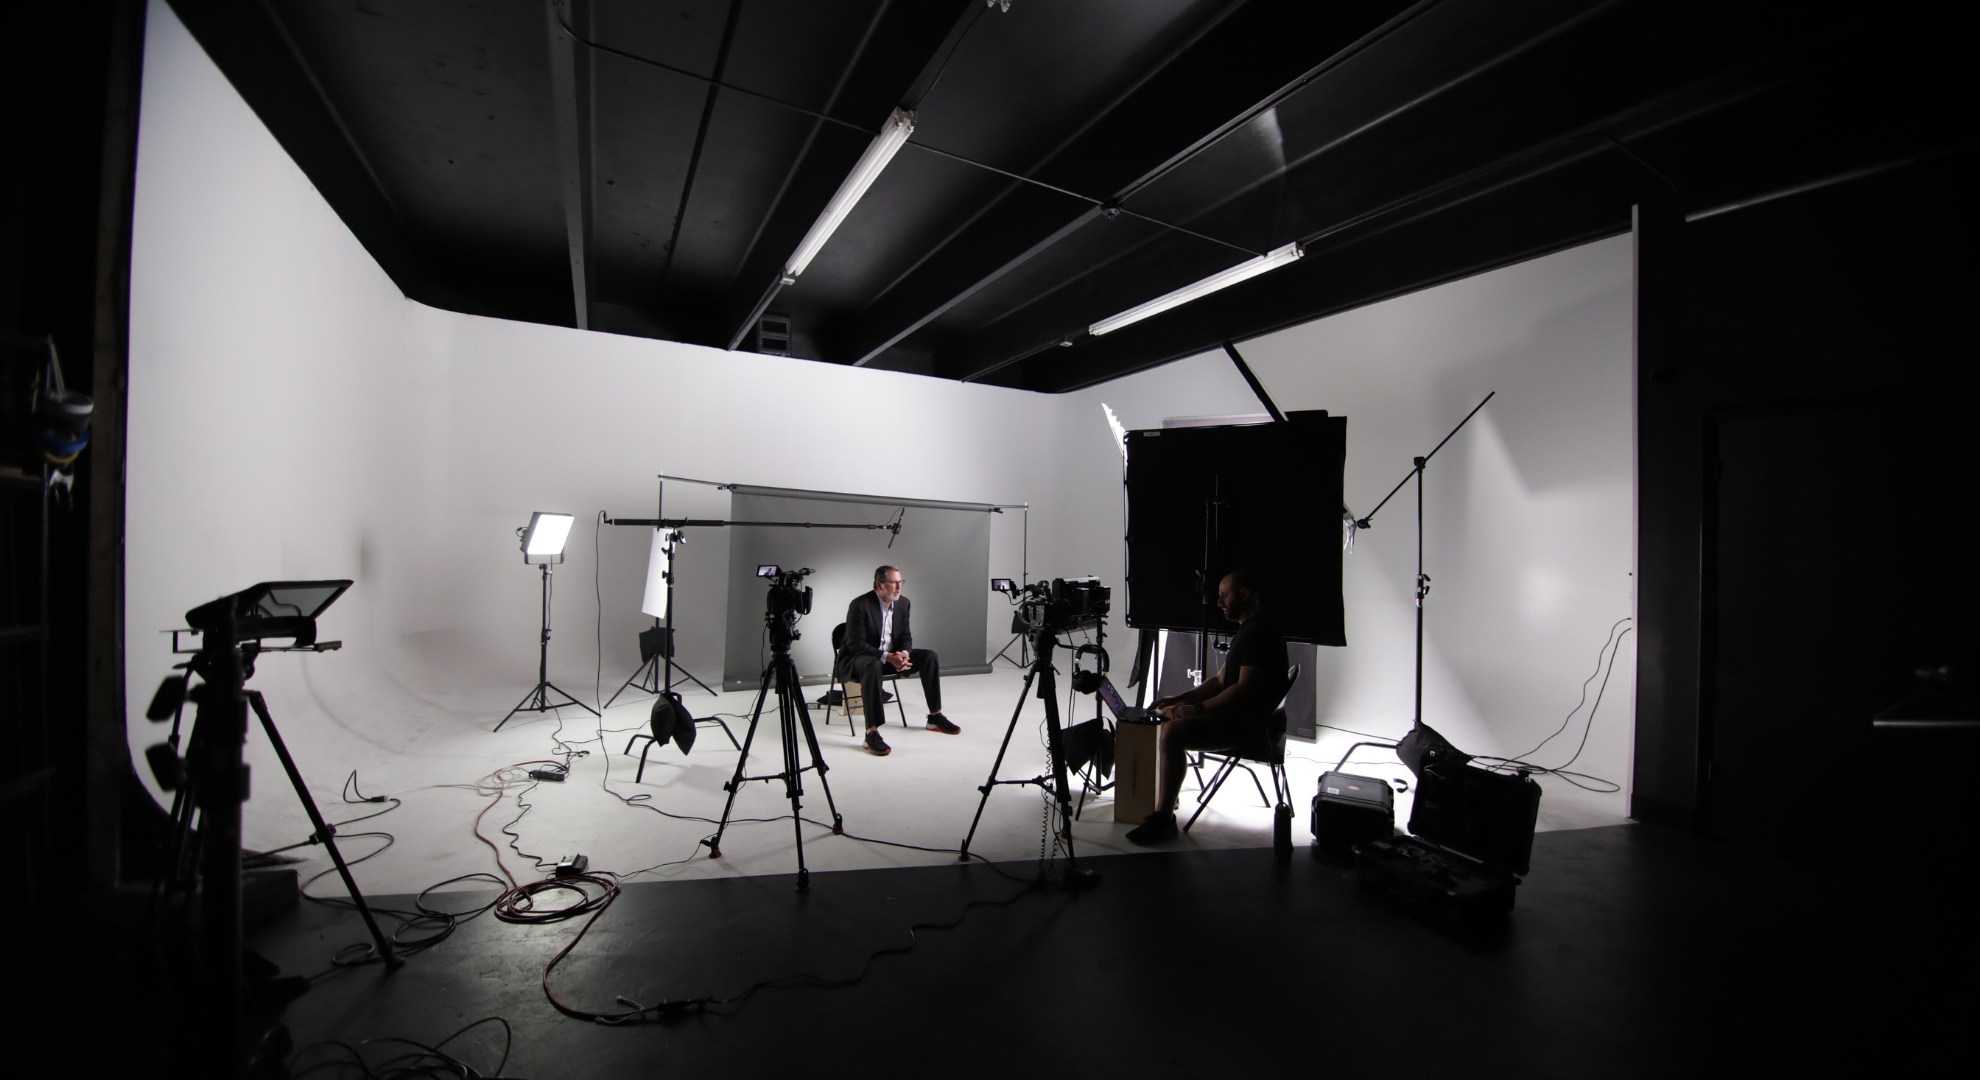 The Lighting, Kits, and for Video